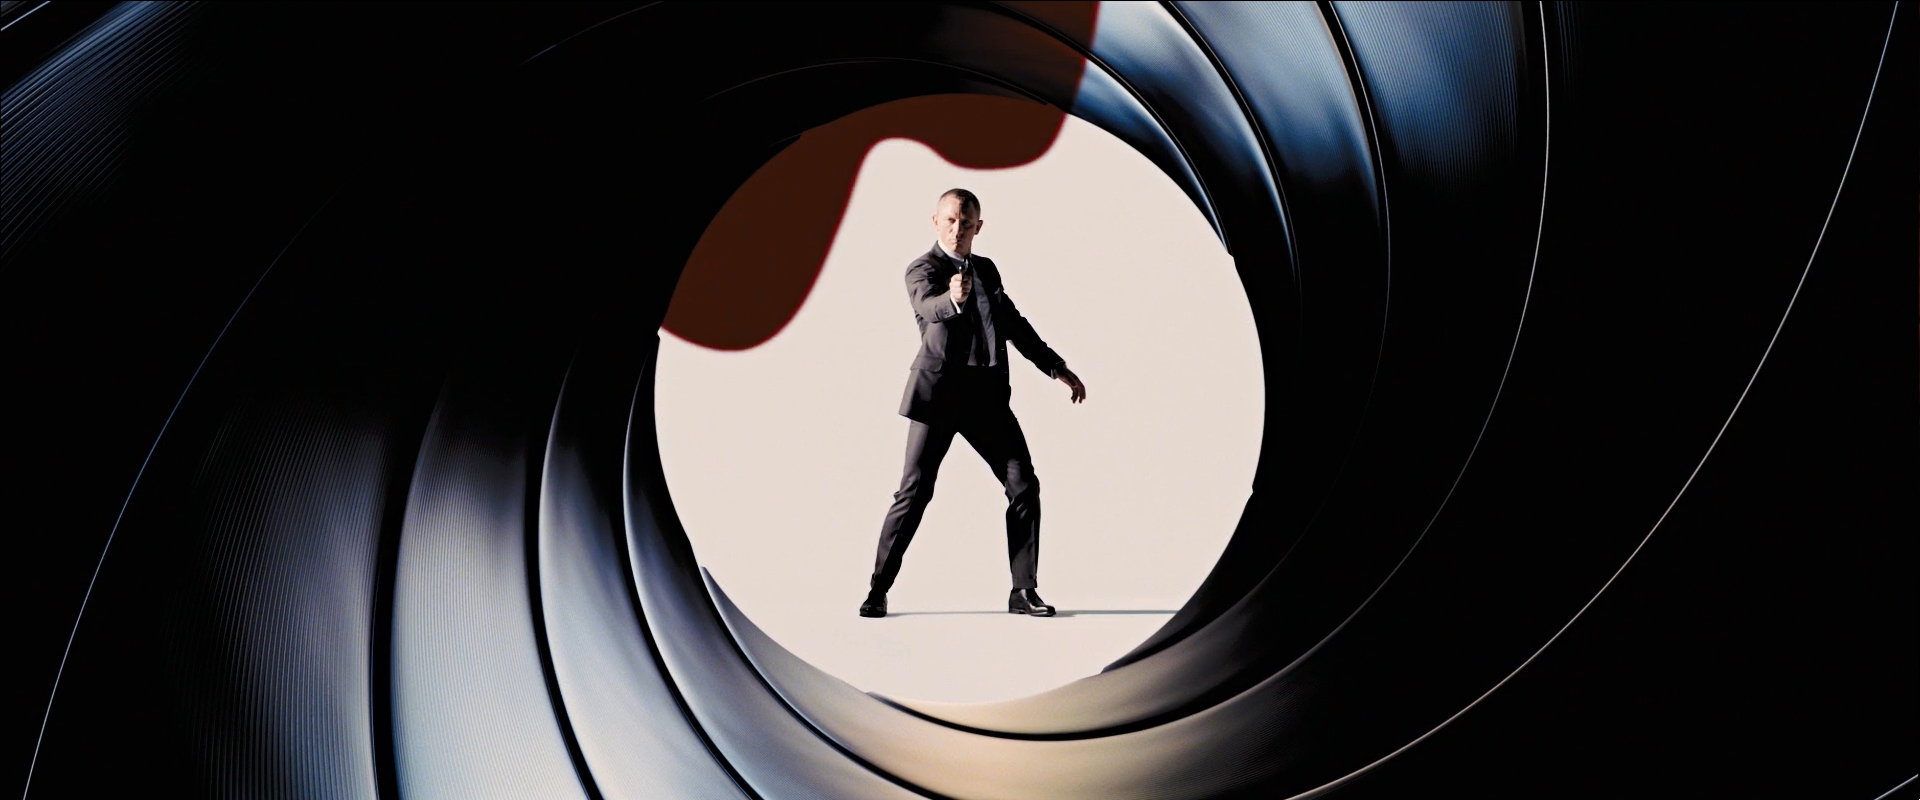 Bond at the end of the barrel